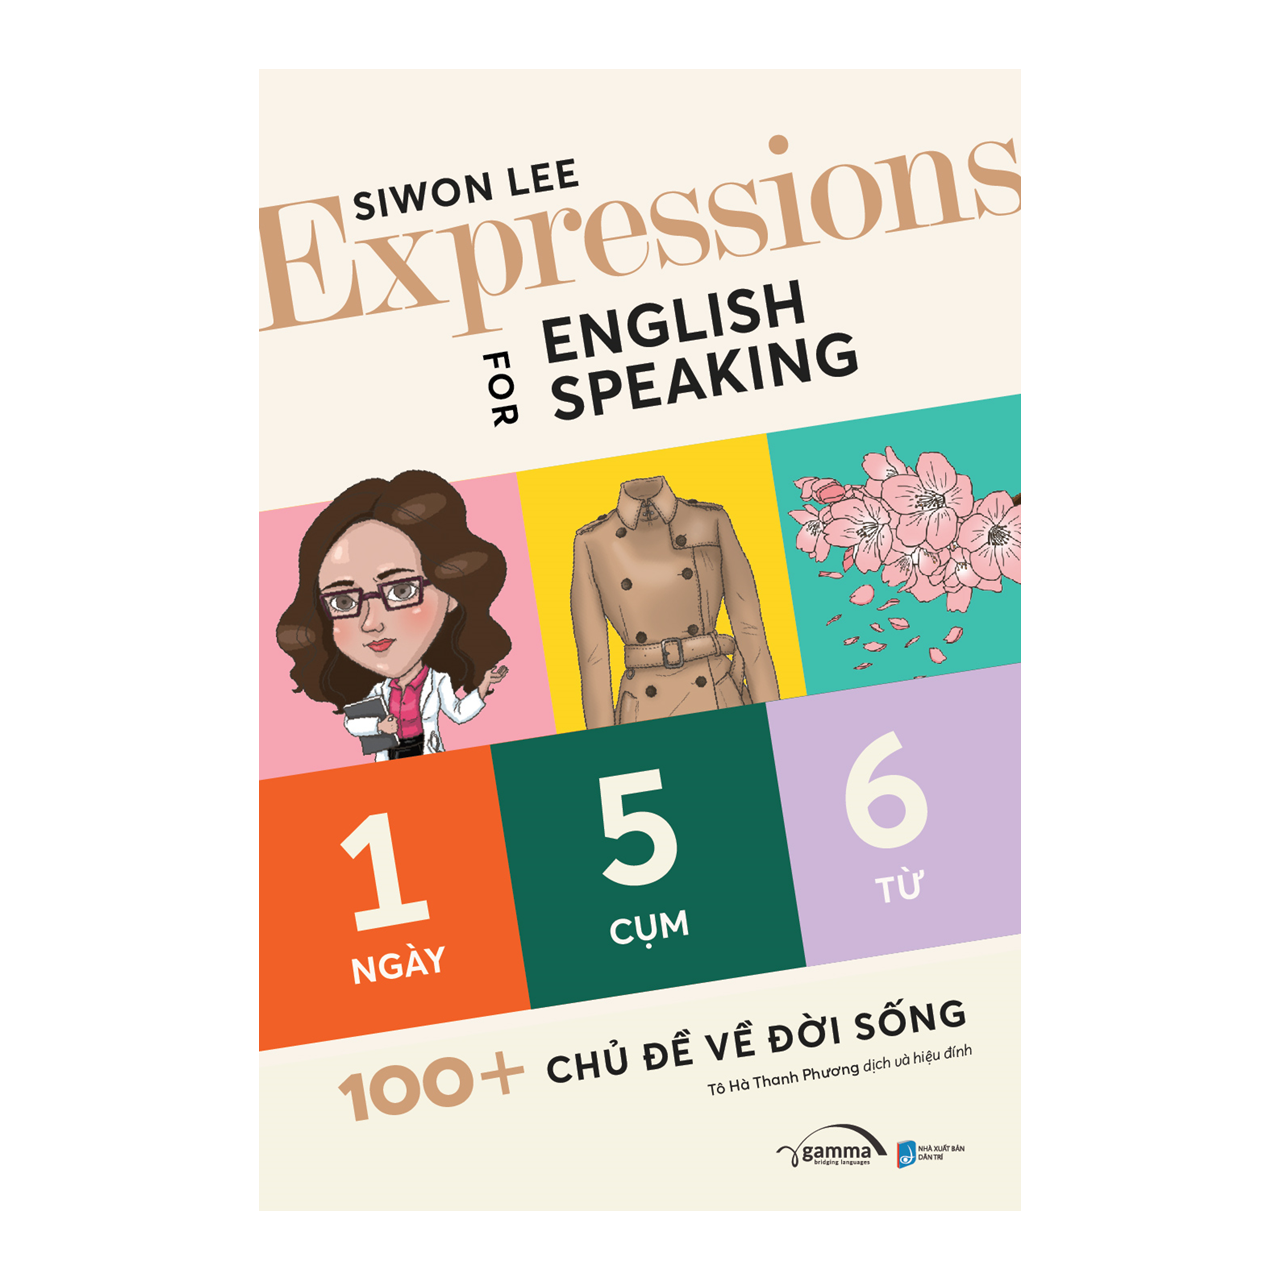 Expressions For English Speaking - 1 Ngày 5 Cụm 6 Từ